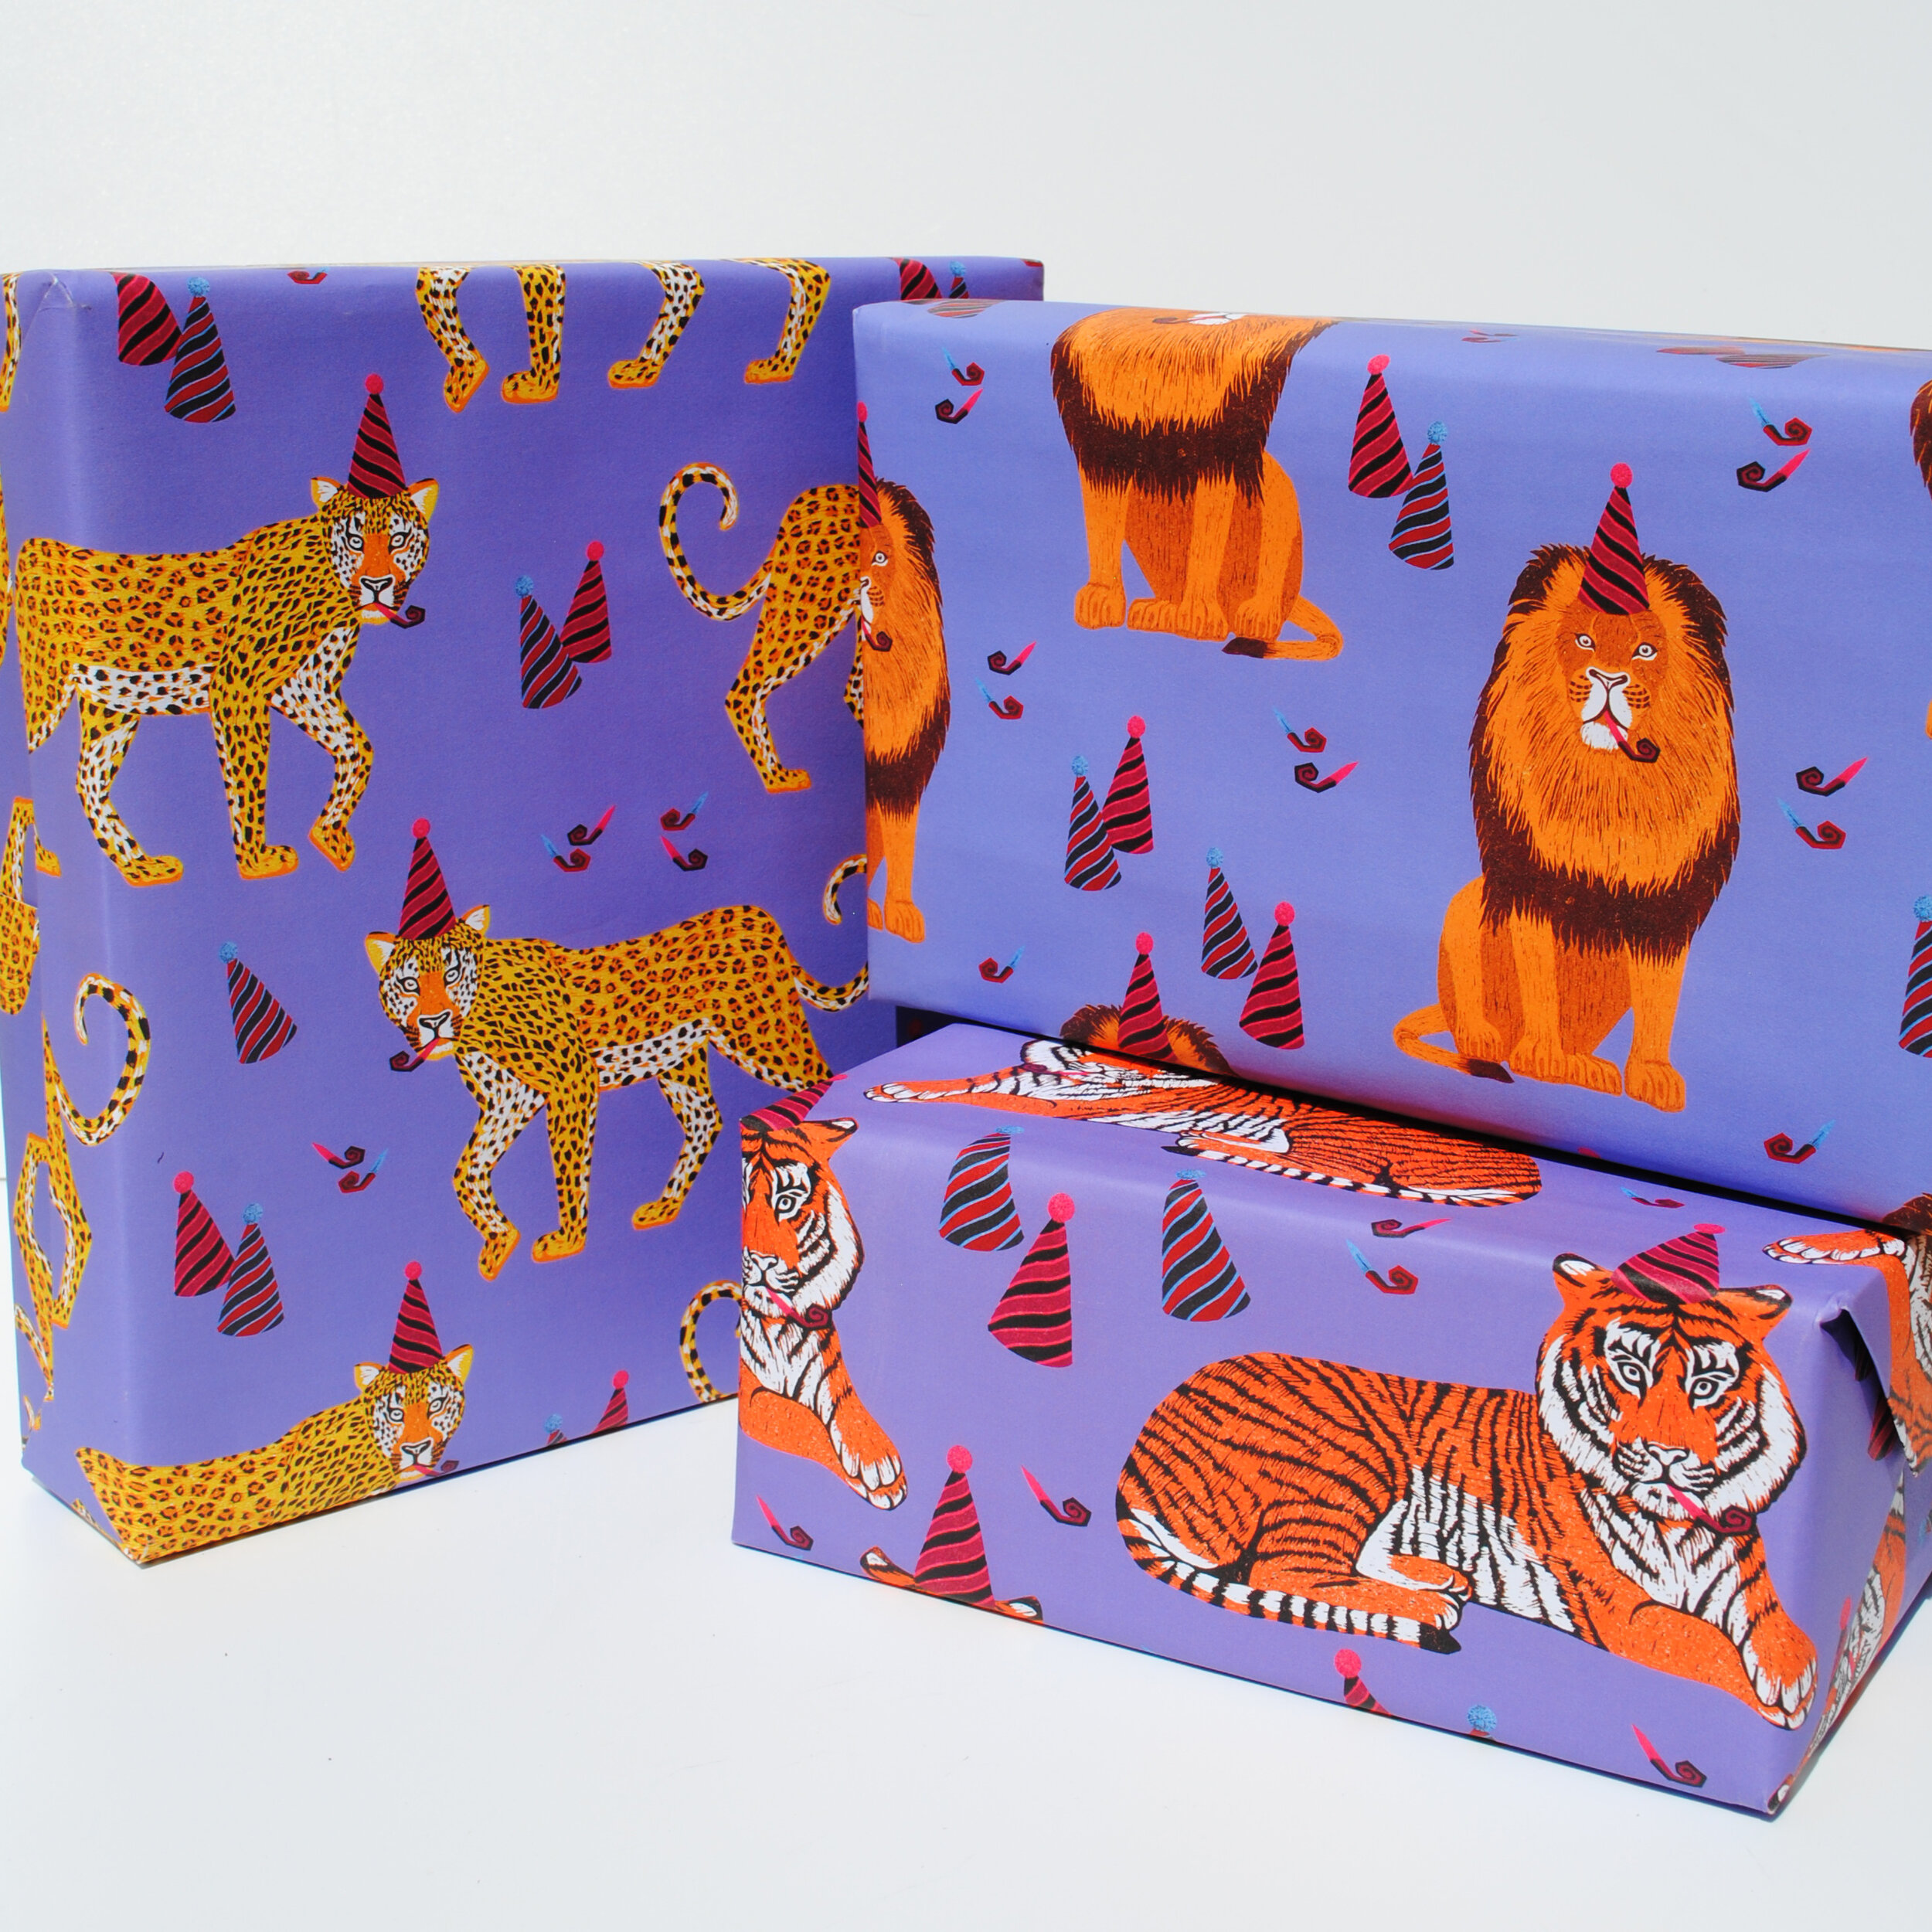 Big Cat collection gift wrap.jpg